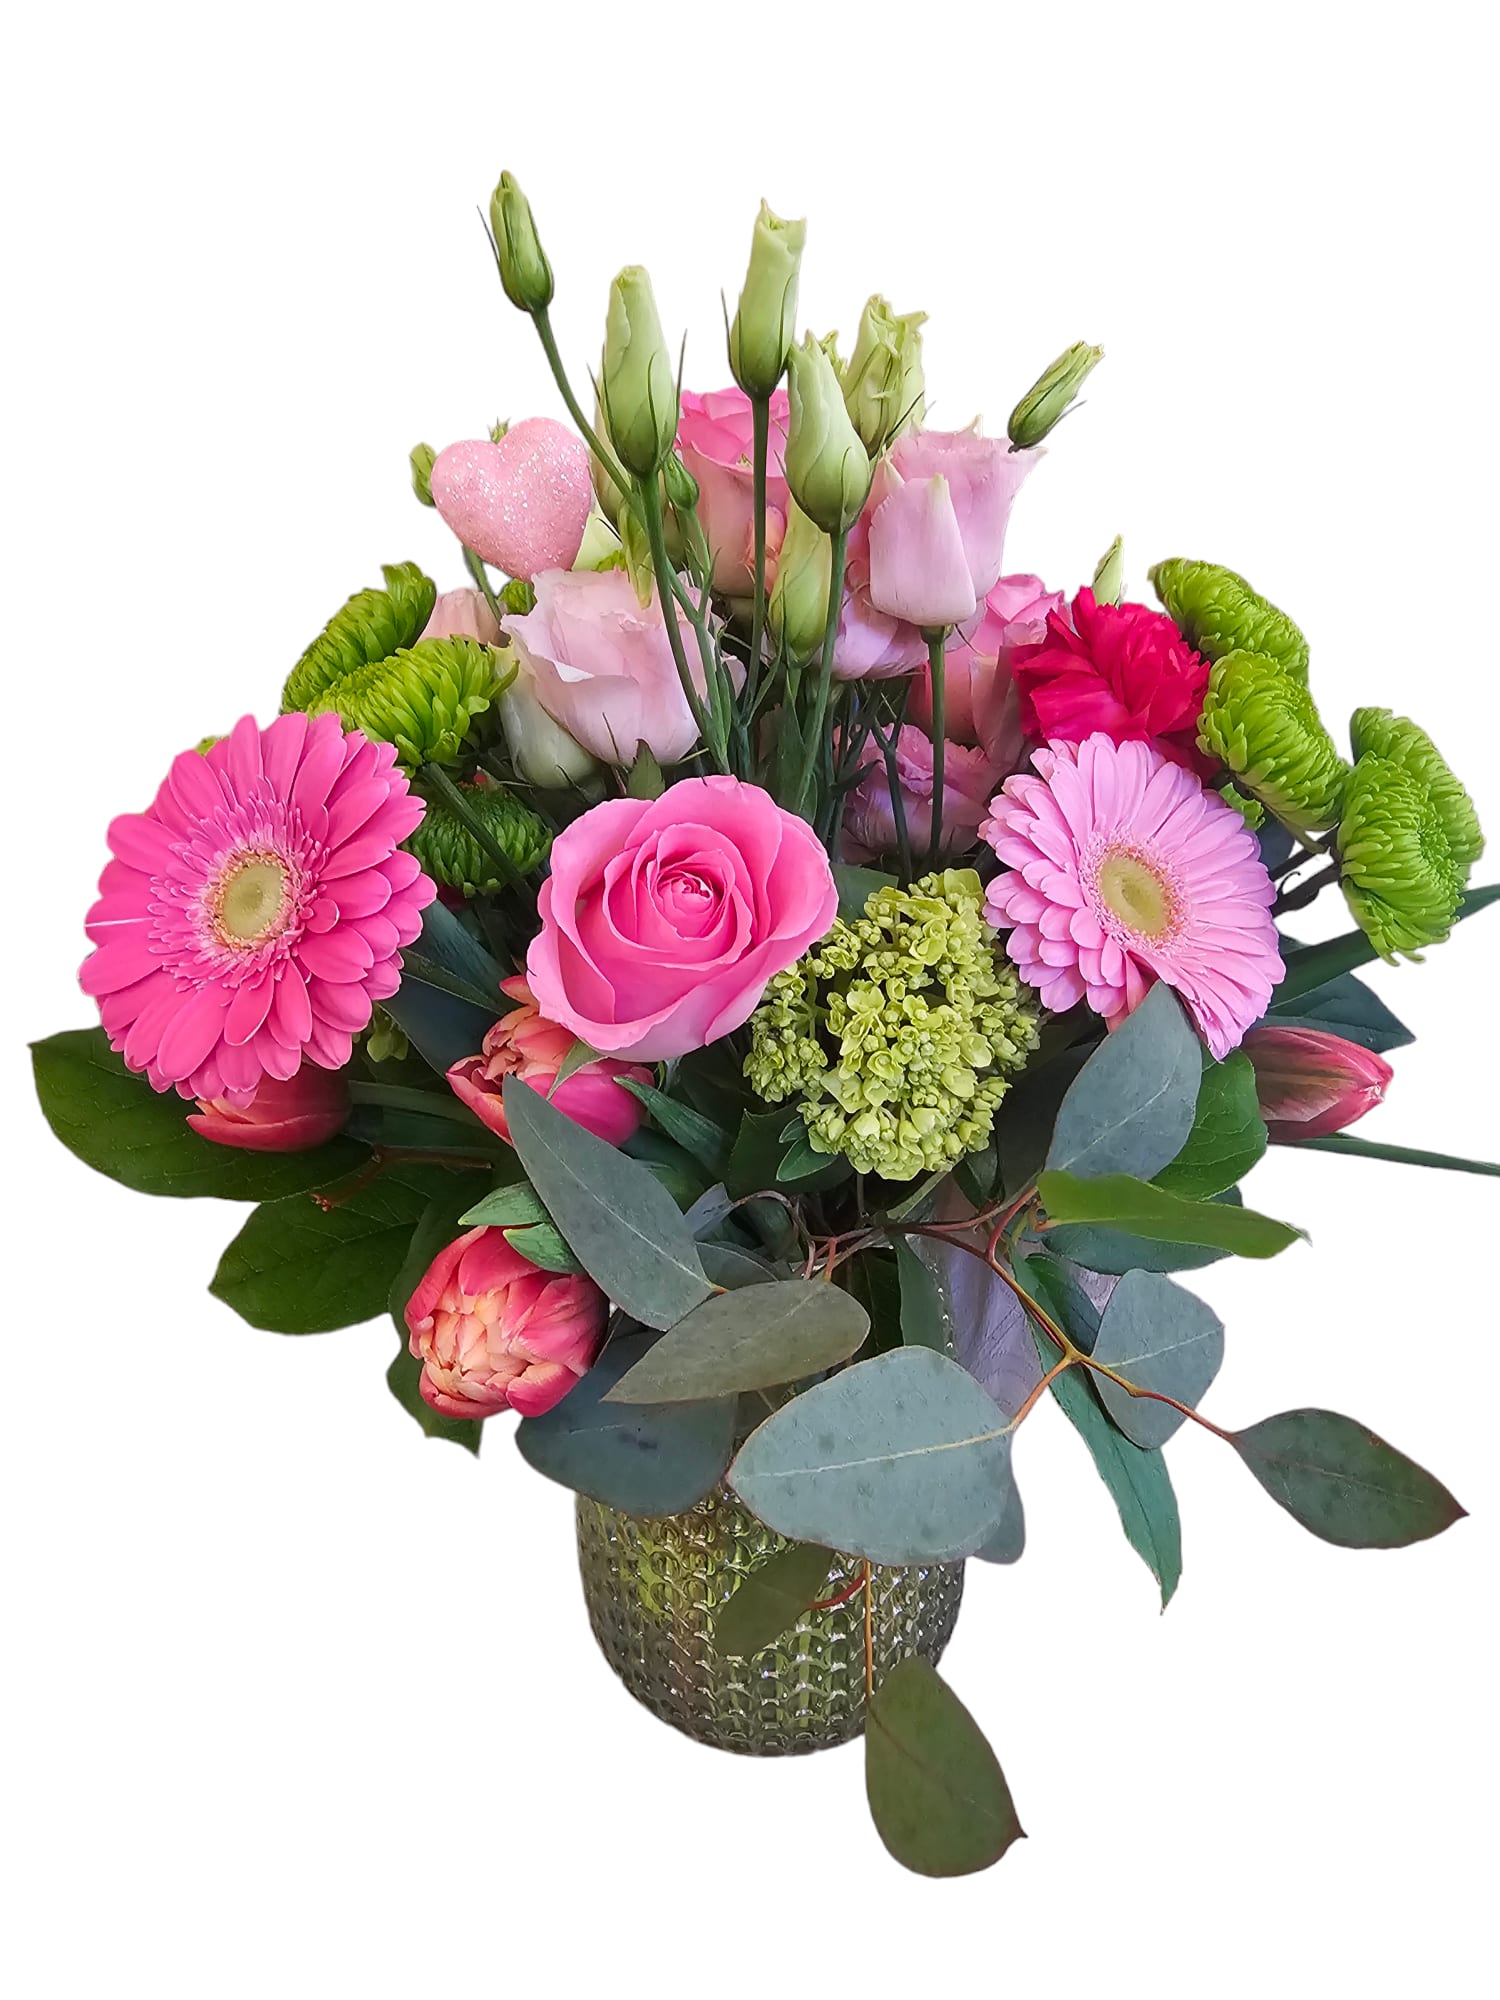 Struck by your Love -  Pink Roses, Double Tulips,Lisianthus,Green Hydrangea, 